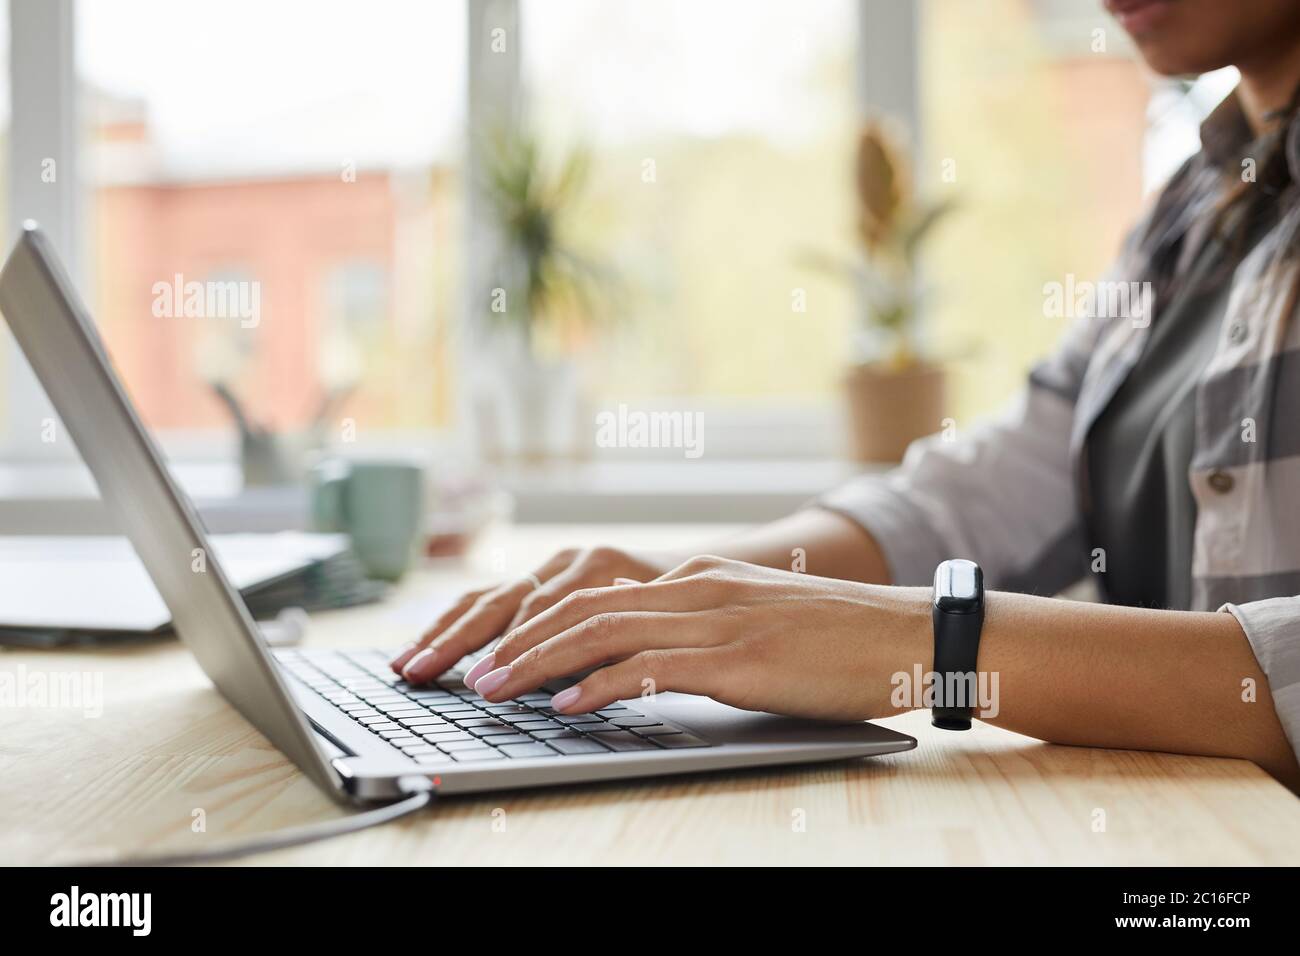 Side view close up of young mixed-race woman using laptop while working at home office, hands typing on keyboard, copy space Stock Photo